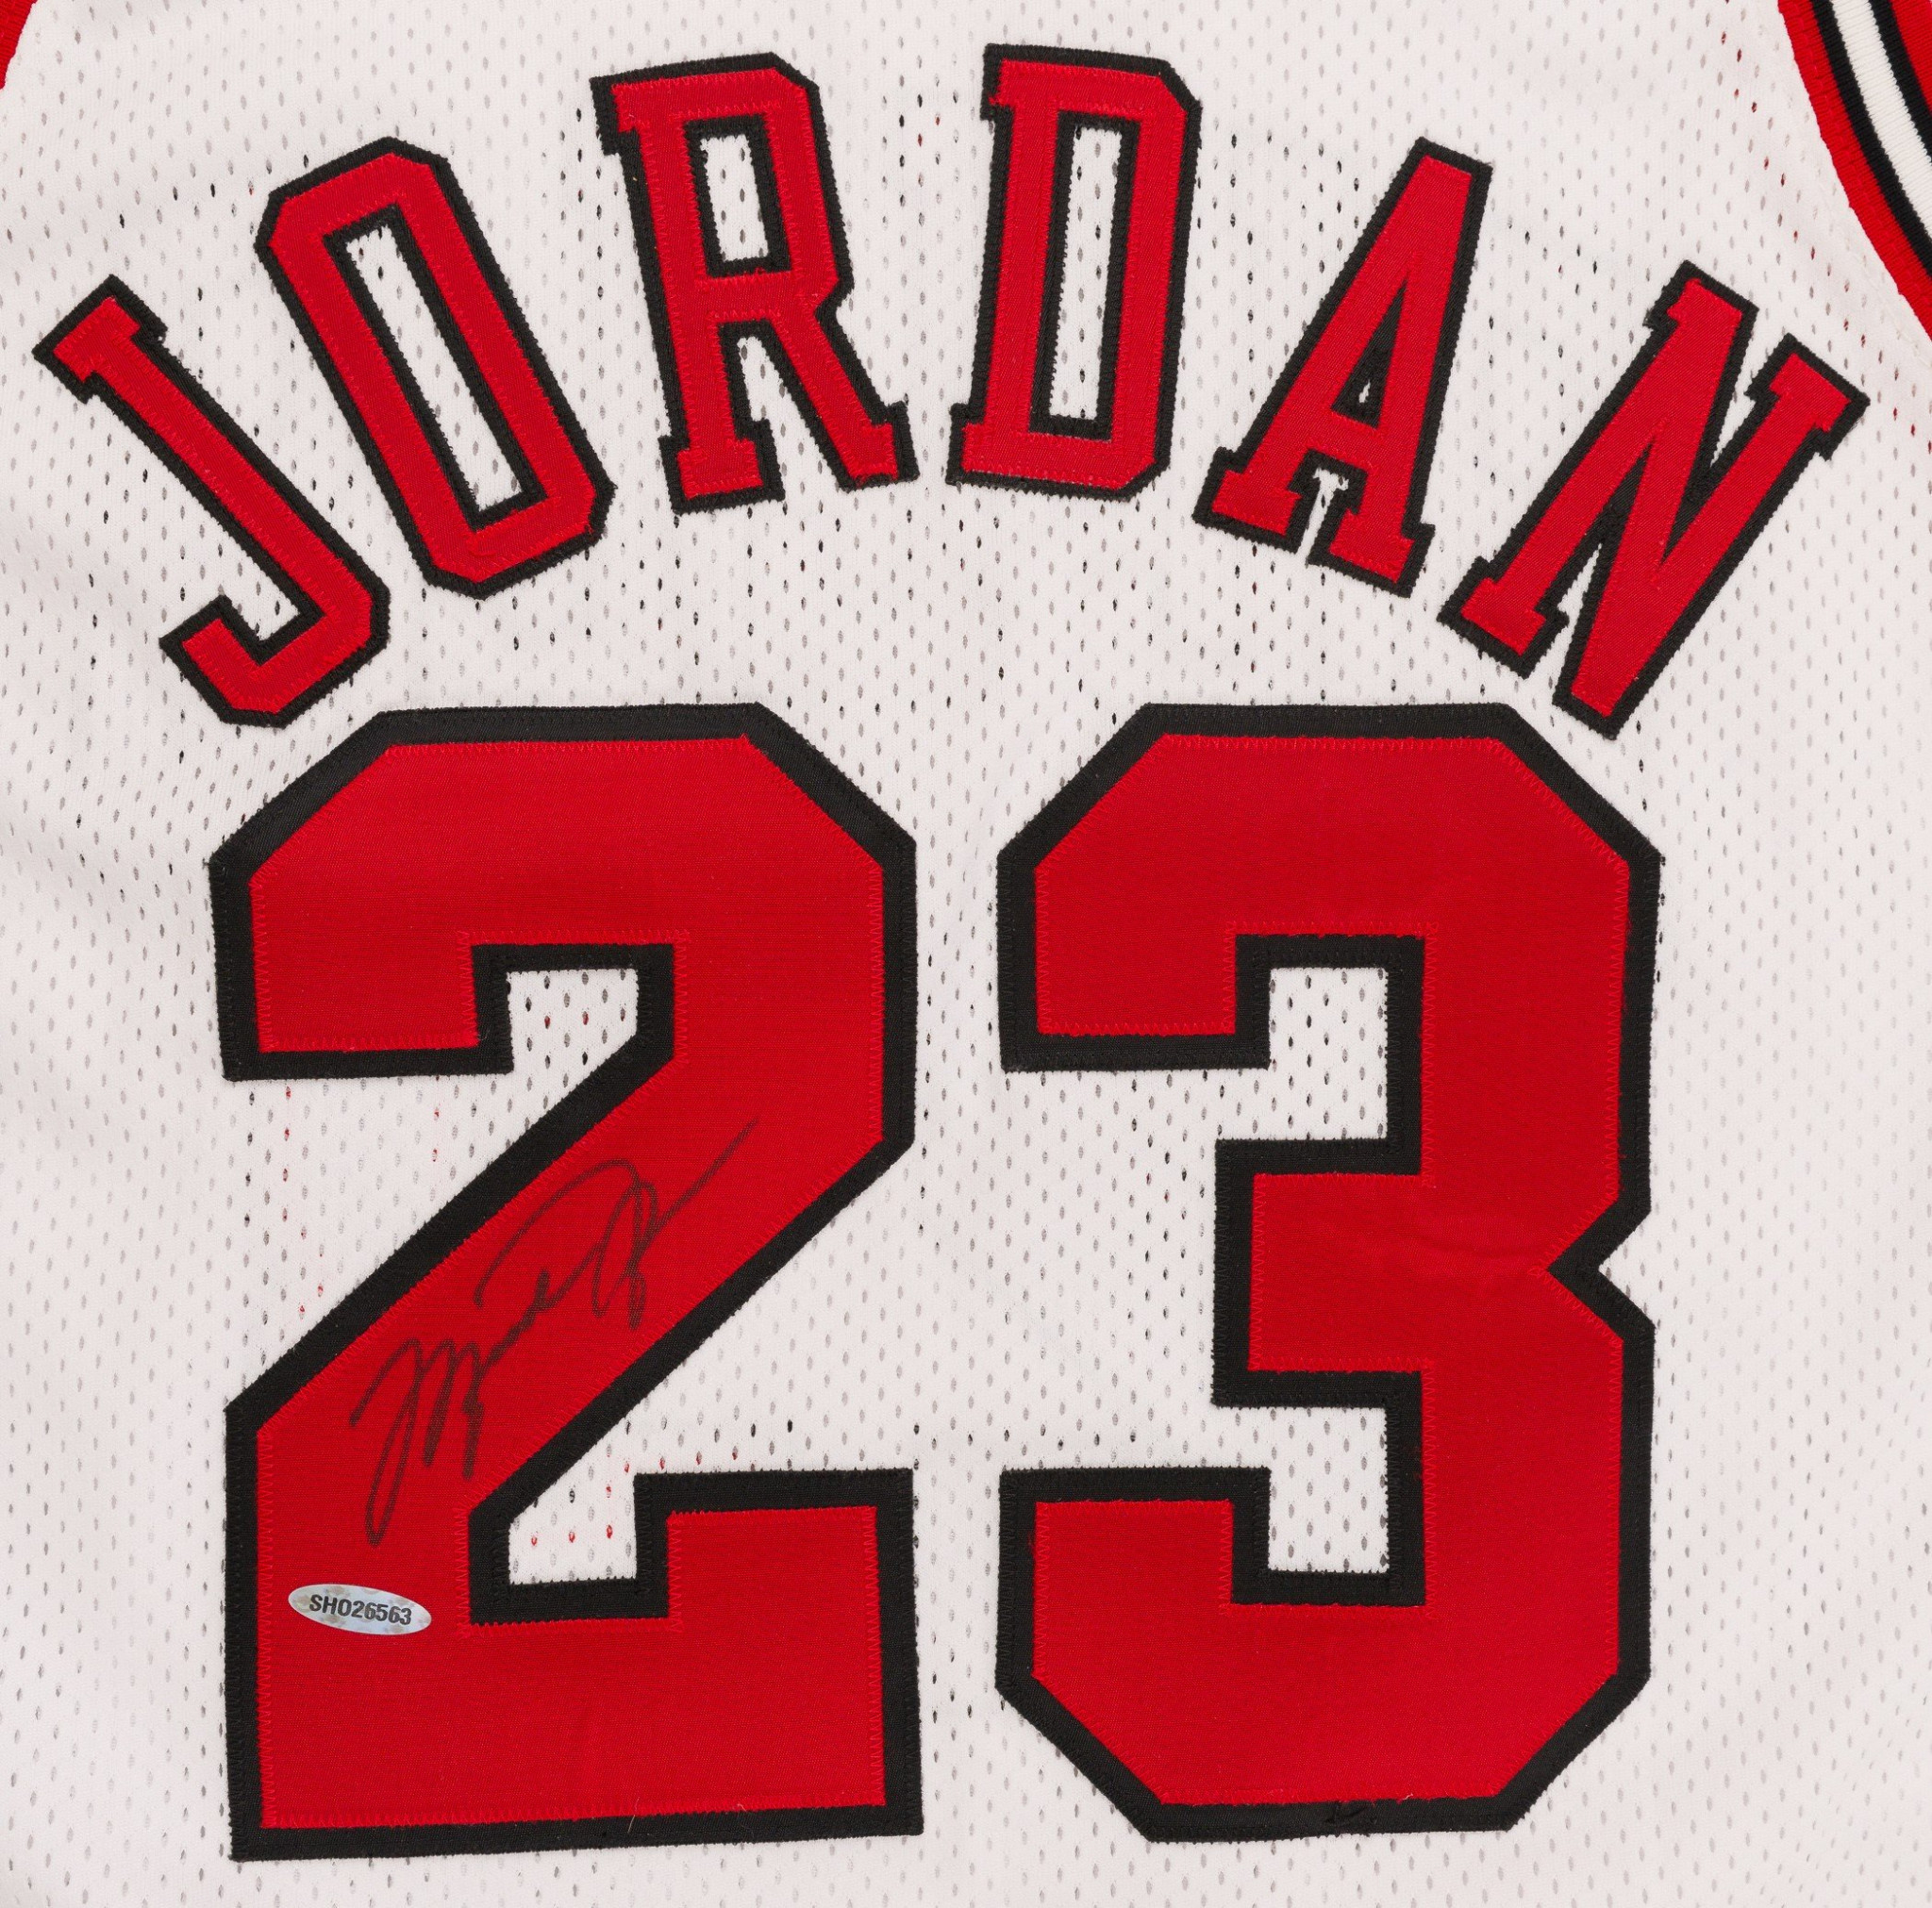 A Chicago Bulls jersey worn by Michael Jordan in the 1997-1998 NBA season and once owned by actress Penny Marshall has sold for $240,000 at auction ©Robert Edwards Auctions